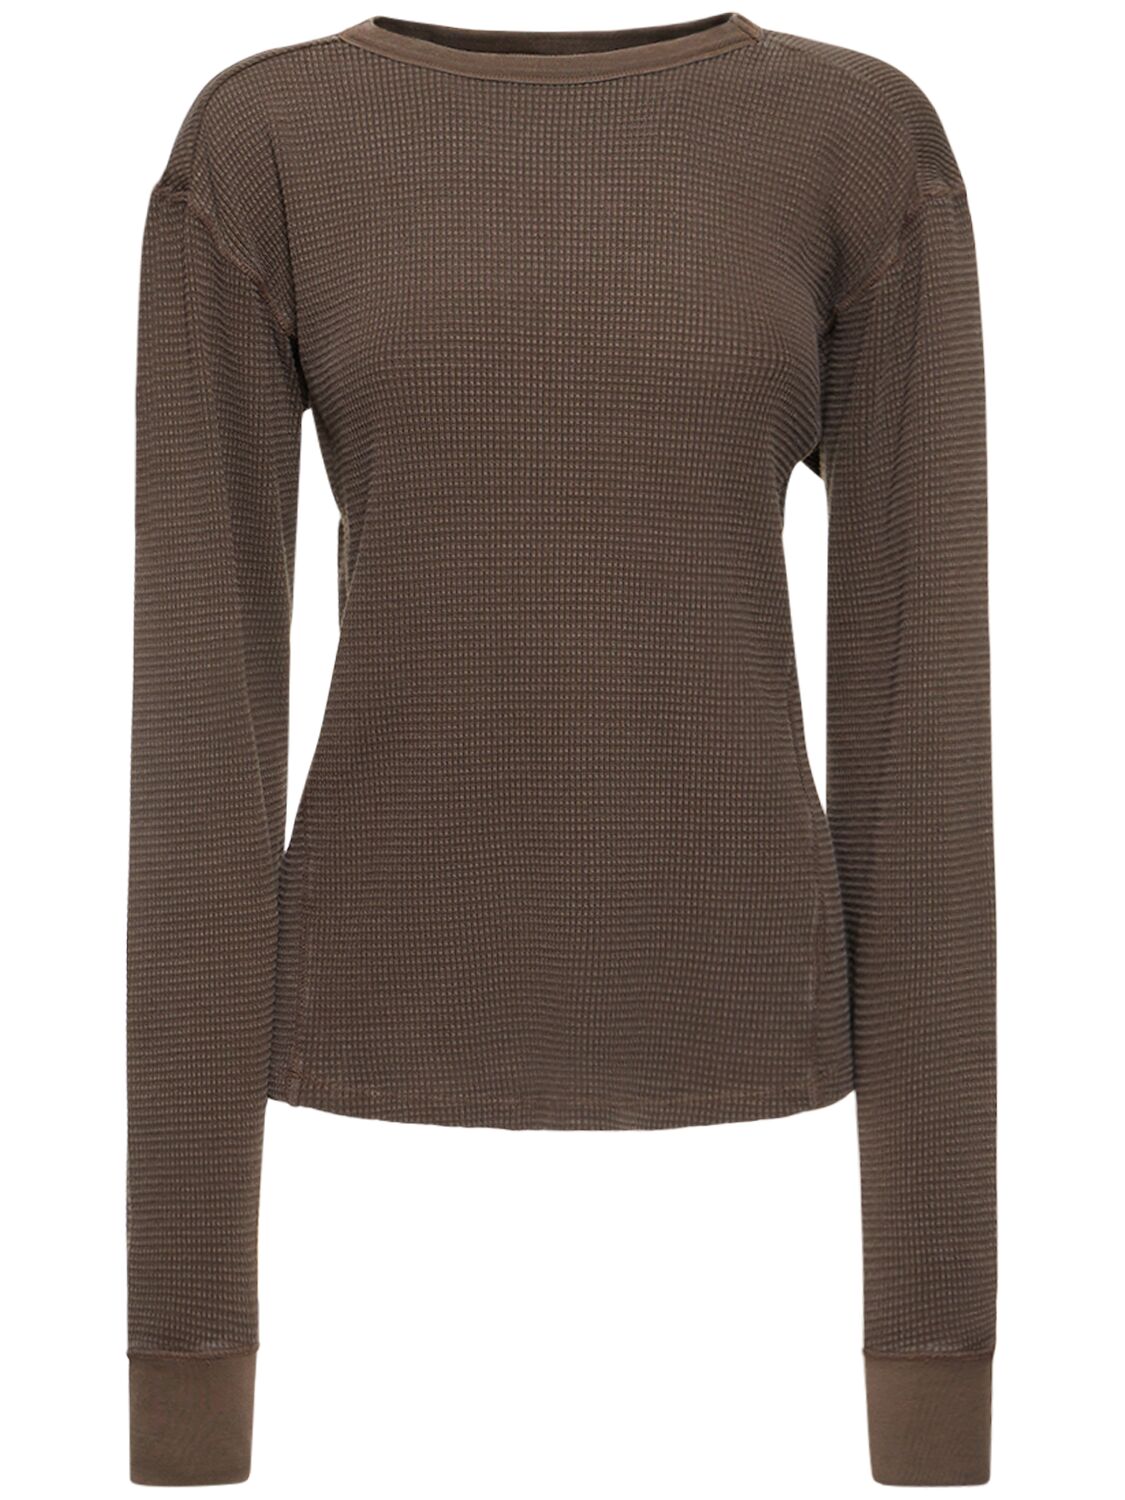 Image of Brunette Thermal Long Sleeve T-shirt